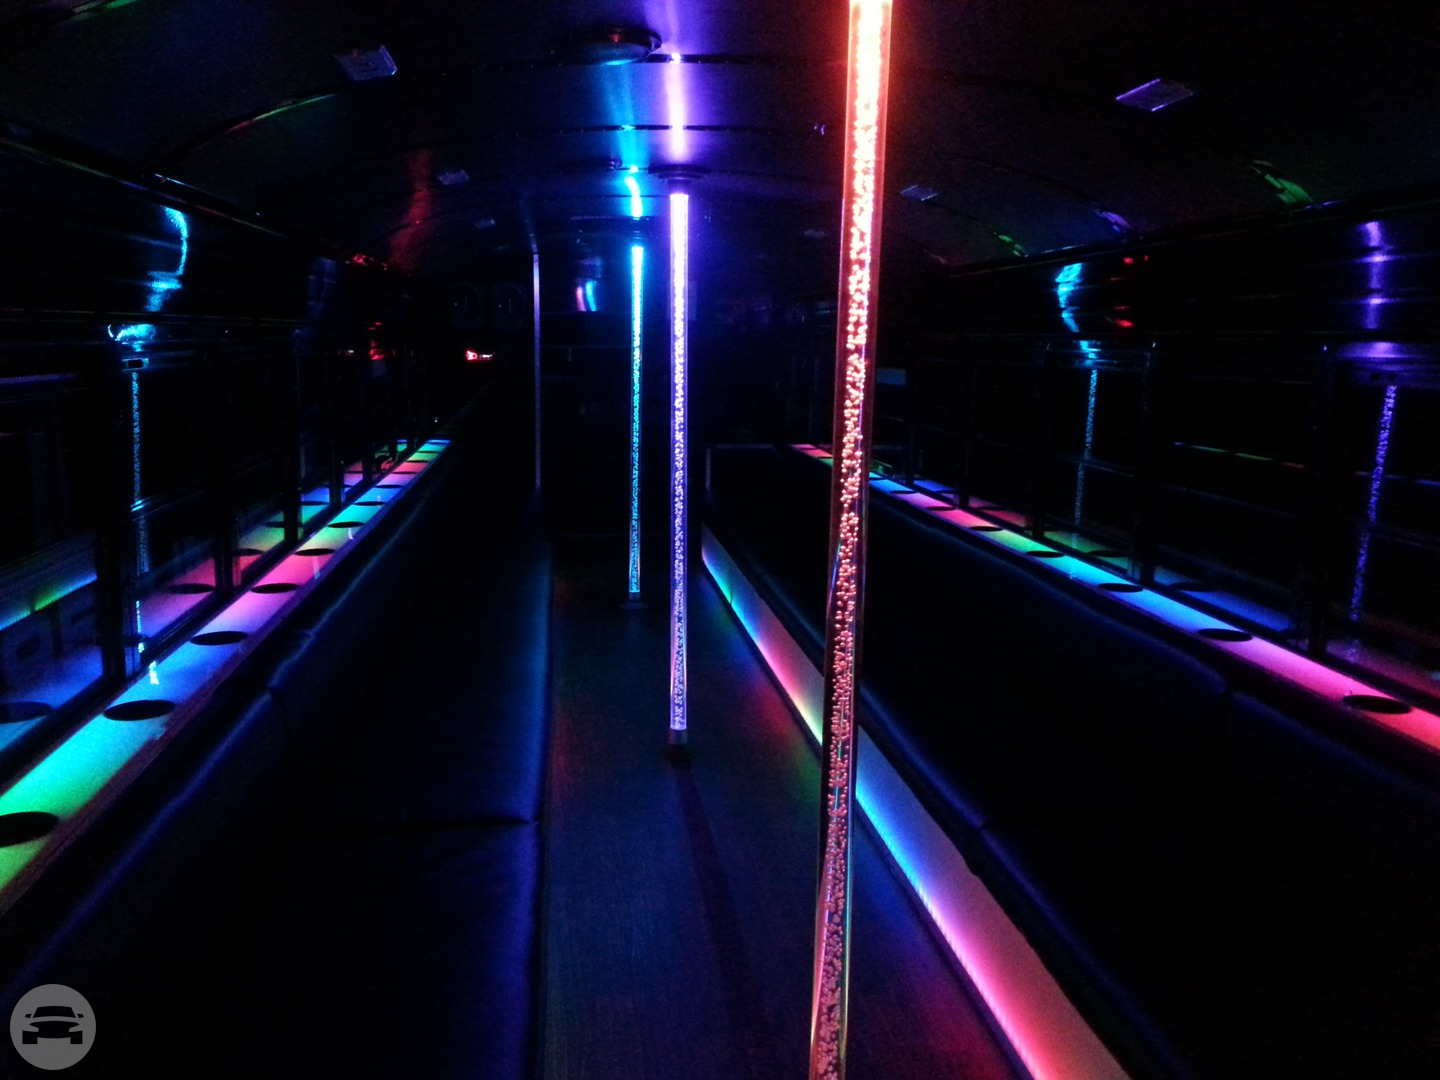 THE BLACK JACK PARTY BUS LIMO
Party Limo Bus /
Minneapolis, MN

 / Hourly $0.00
